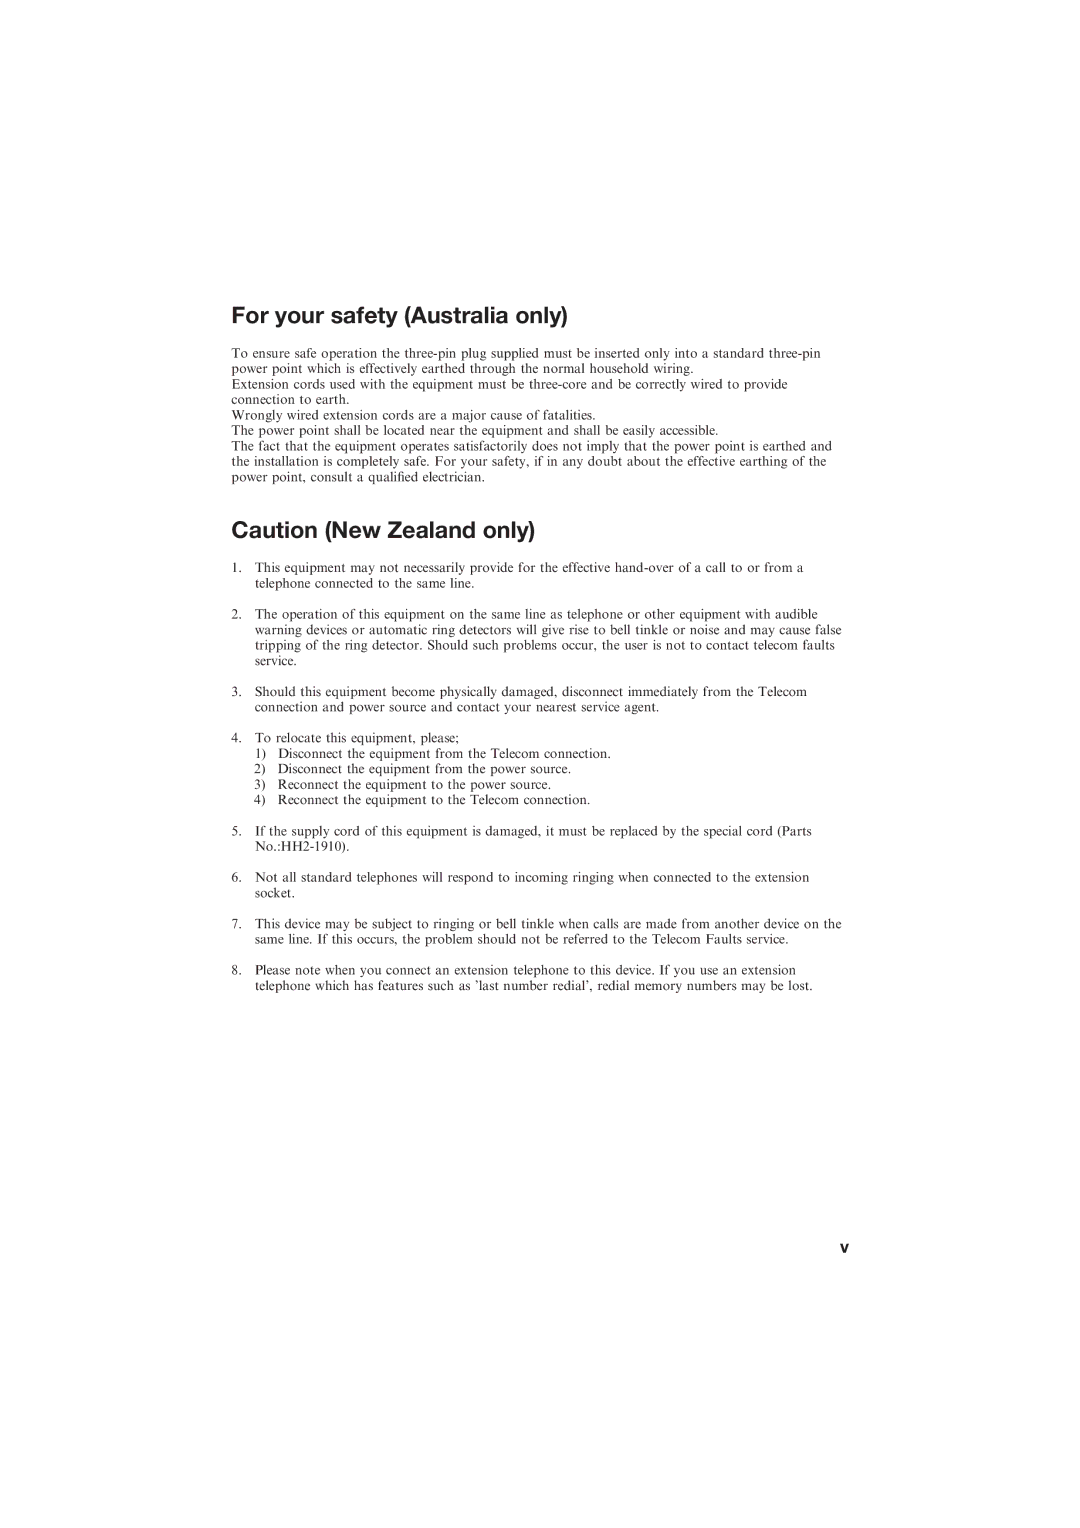 Canon B155 manual For your safety Australia only 